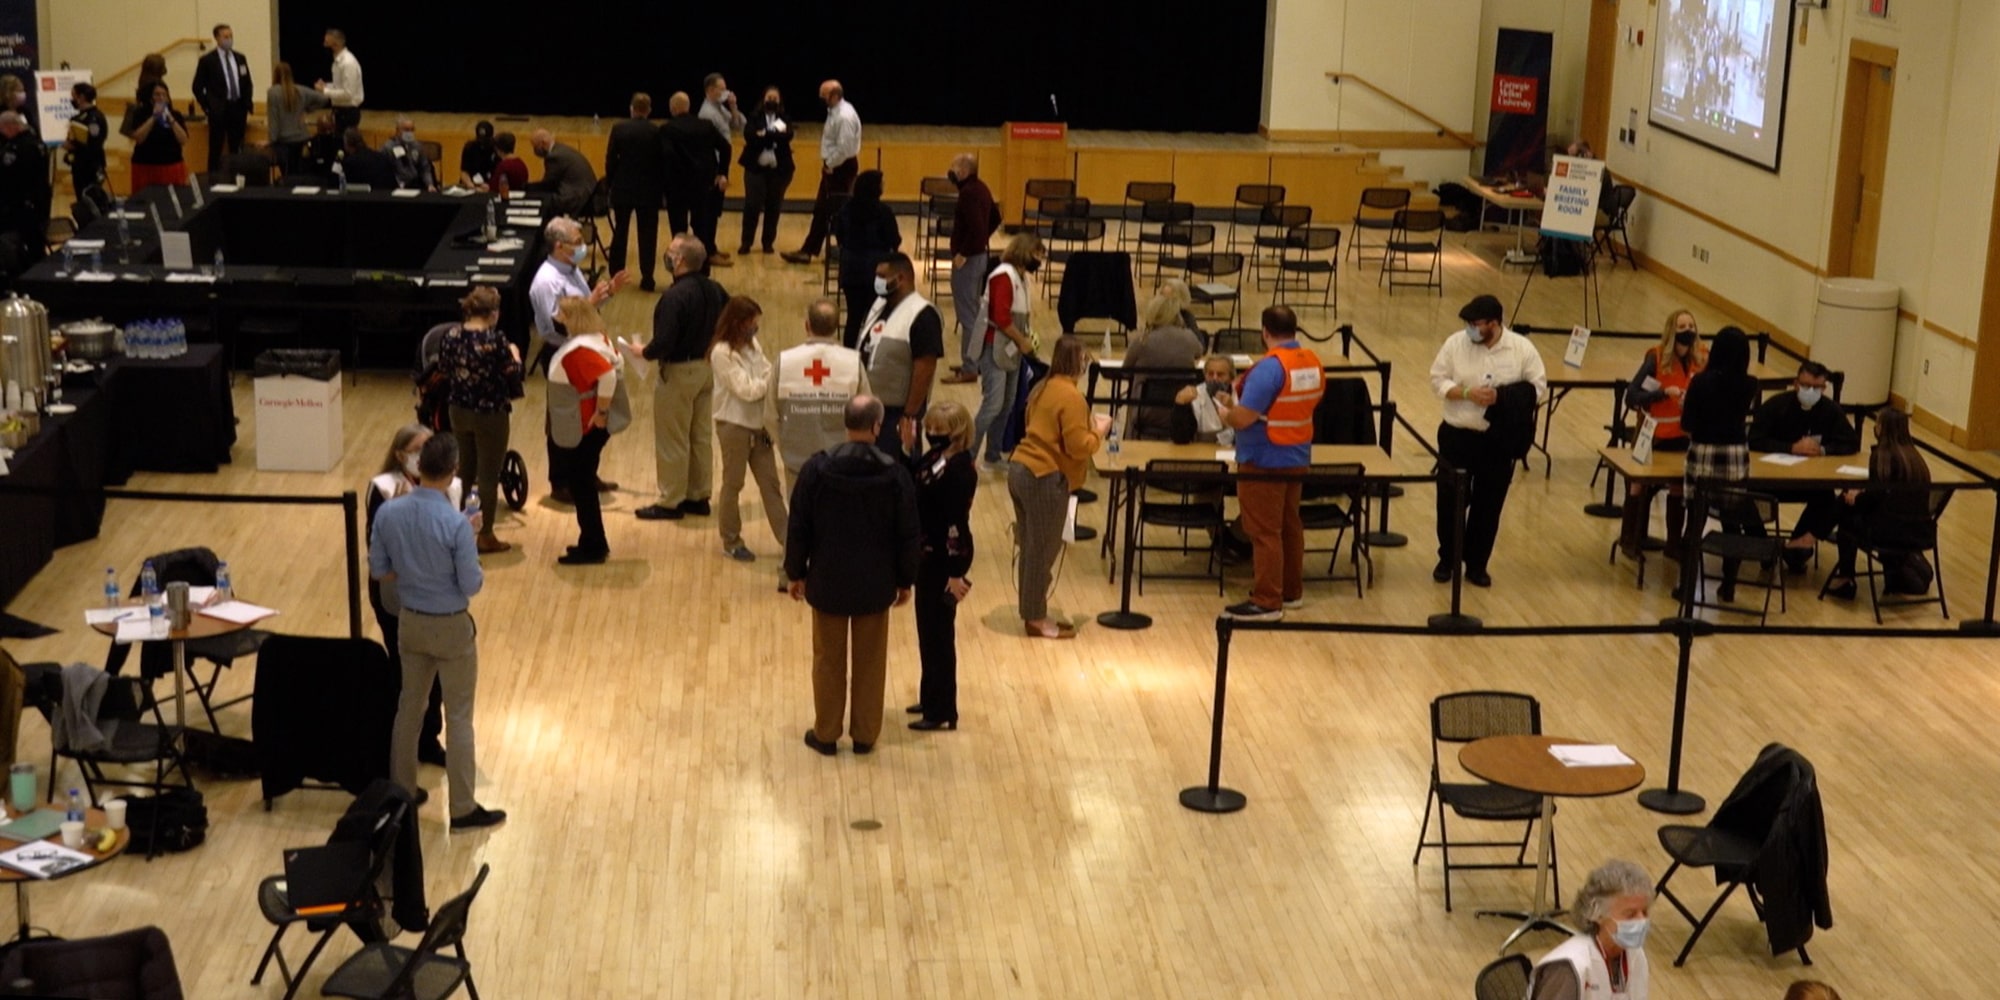 overview of CMU's emergence exercise in Rangos Ballroom